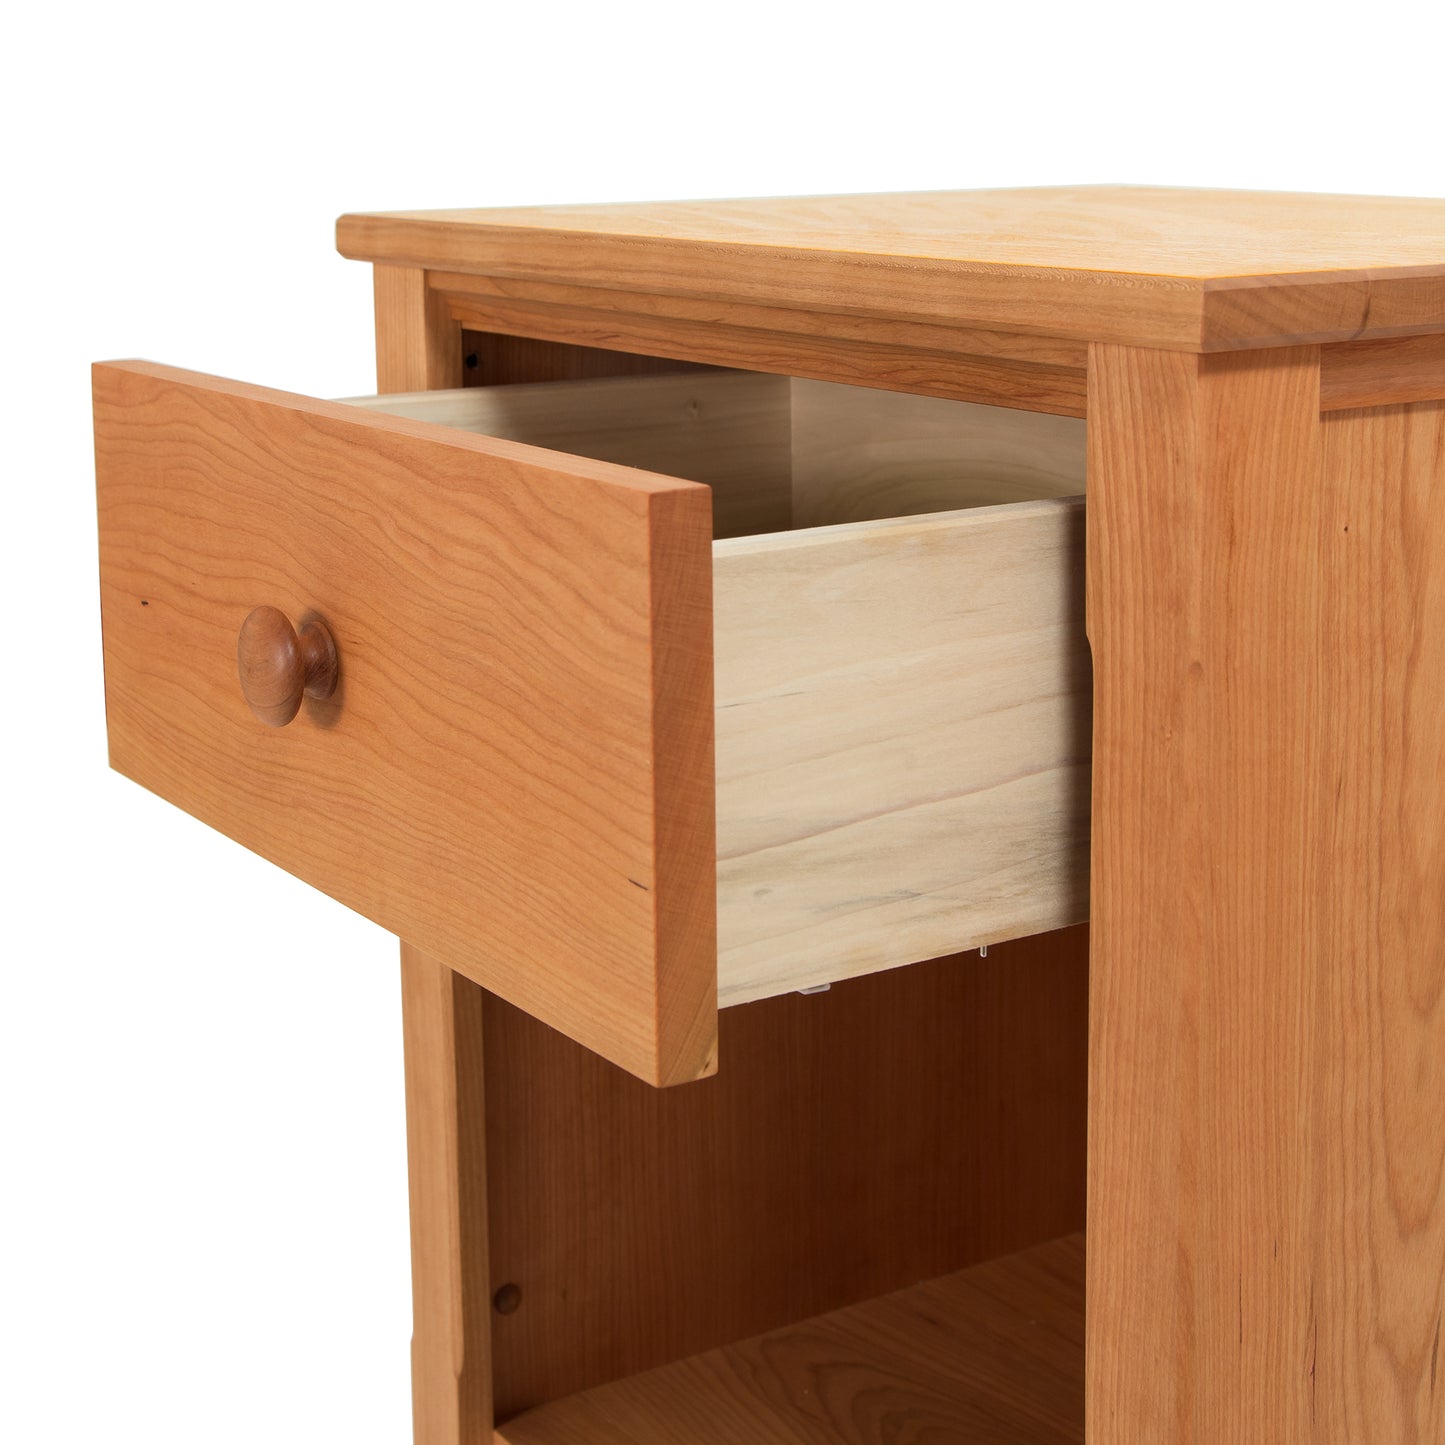 A close-up of an open drawer in a Maple Corner Woodworks Vermont Shaker 1-Drawer Enclosed Shelf Nightstand, showing the natural cherry wood grain and simple knob handle, against a white background.